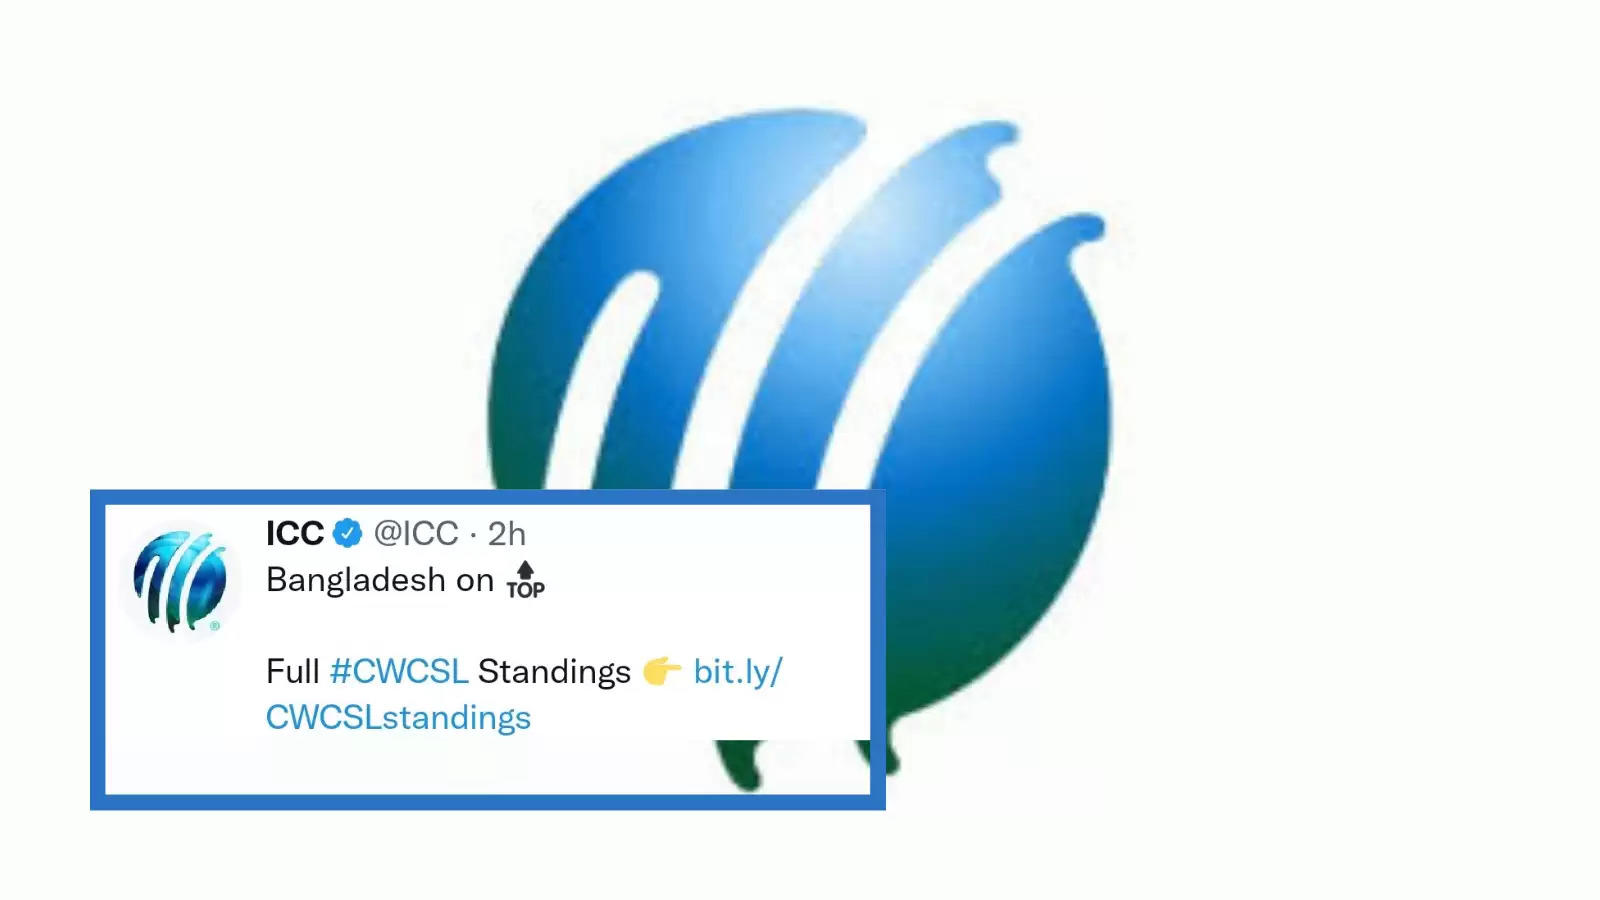 ICC shares Super League table with 10 teams, forgets WTC champions New Zealand